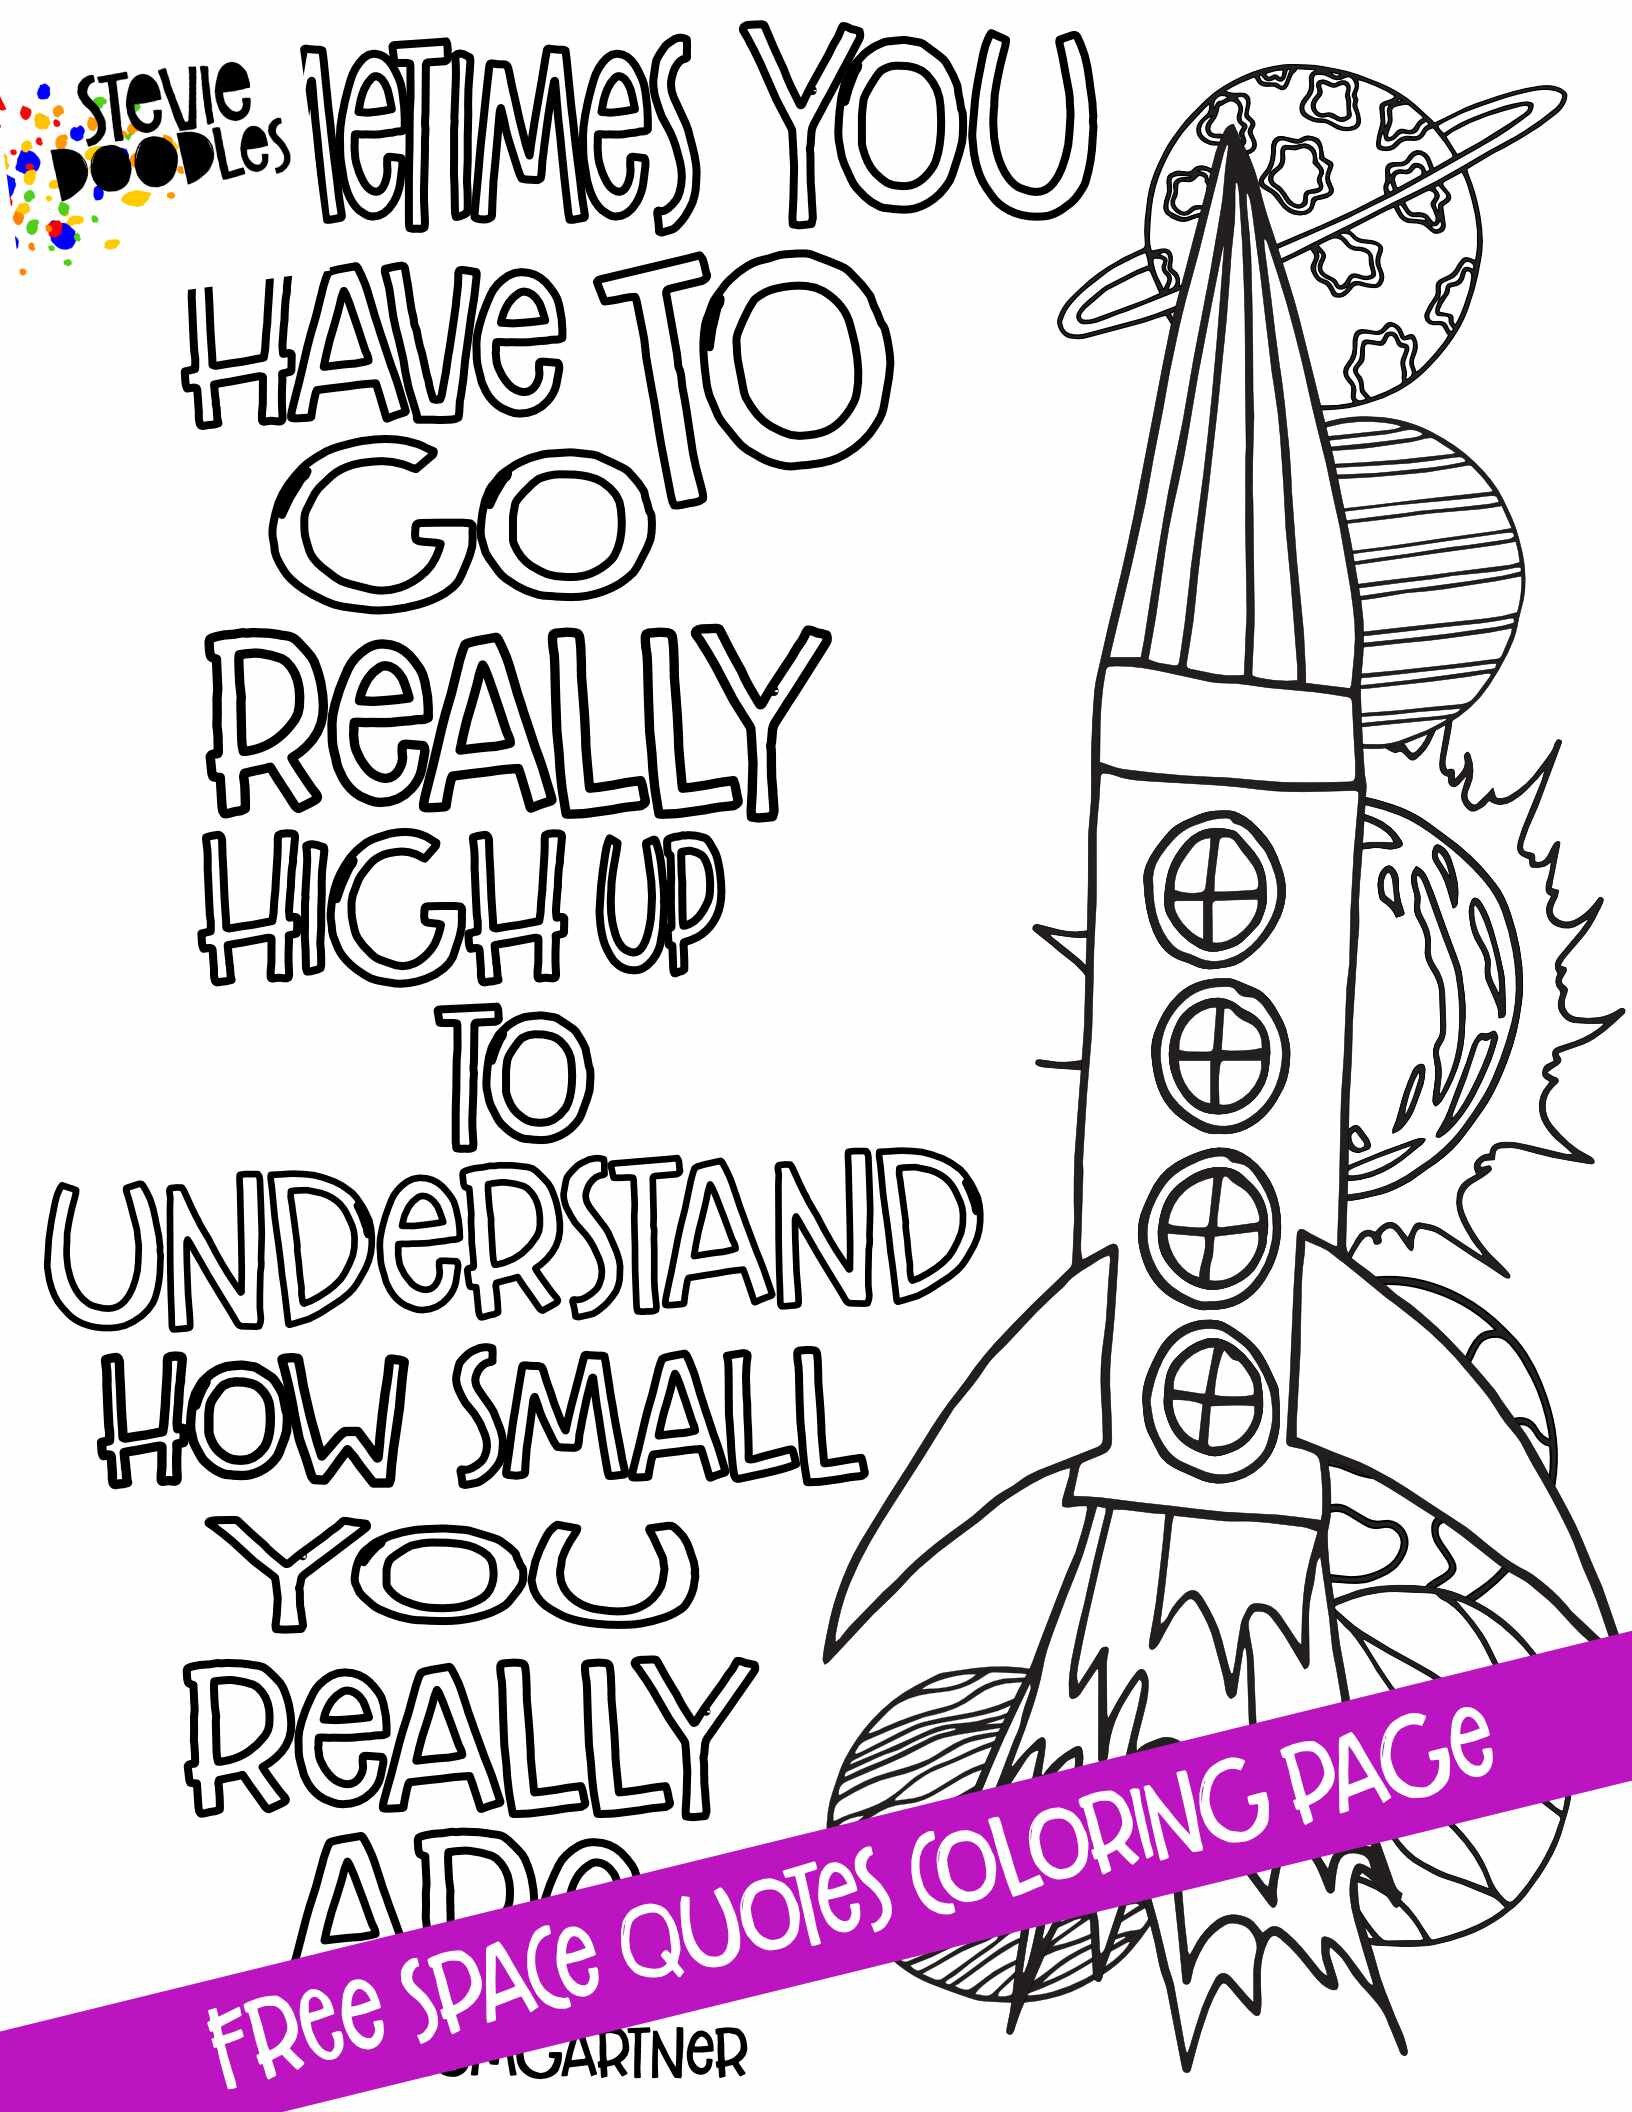 Free! Print and color these 8 free pages about space from Stevie doodles and come to visit my page for all of your coloring page needs!